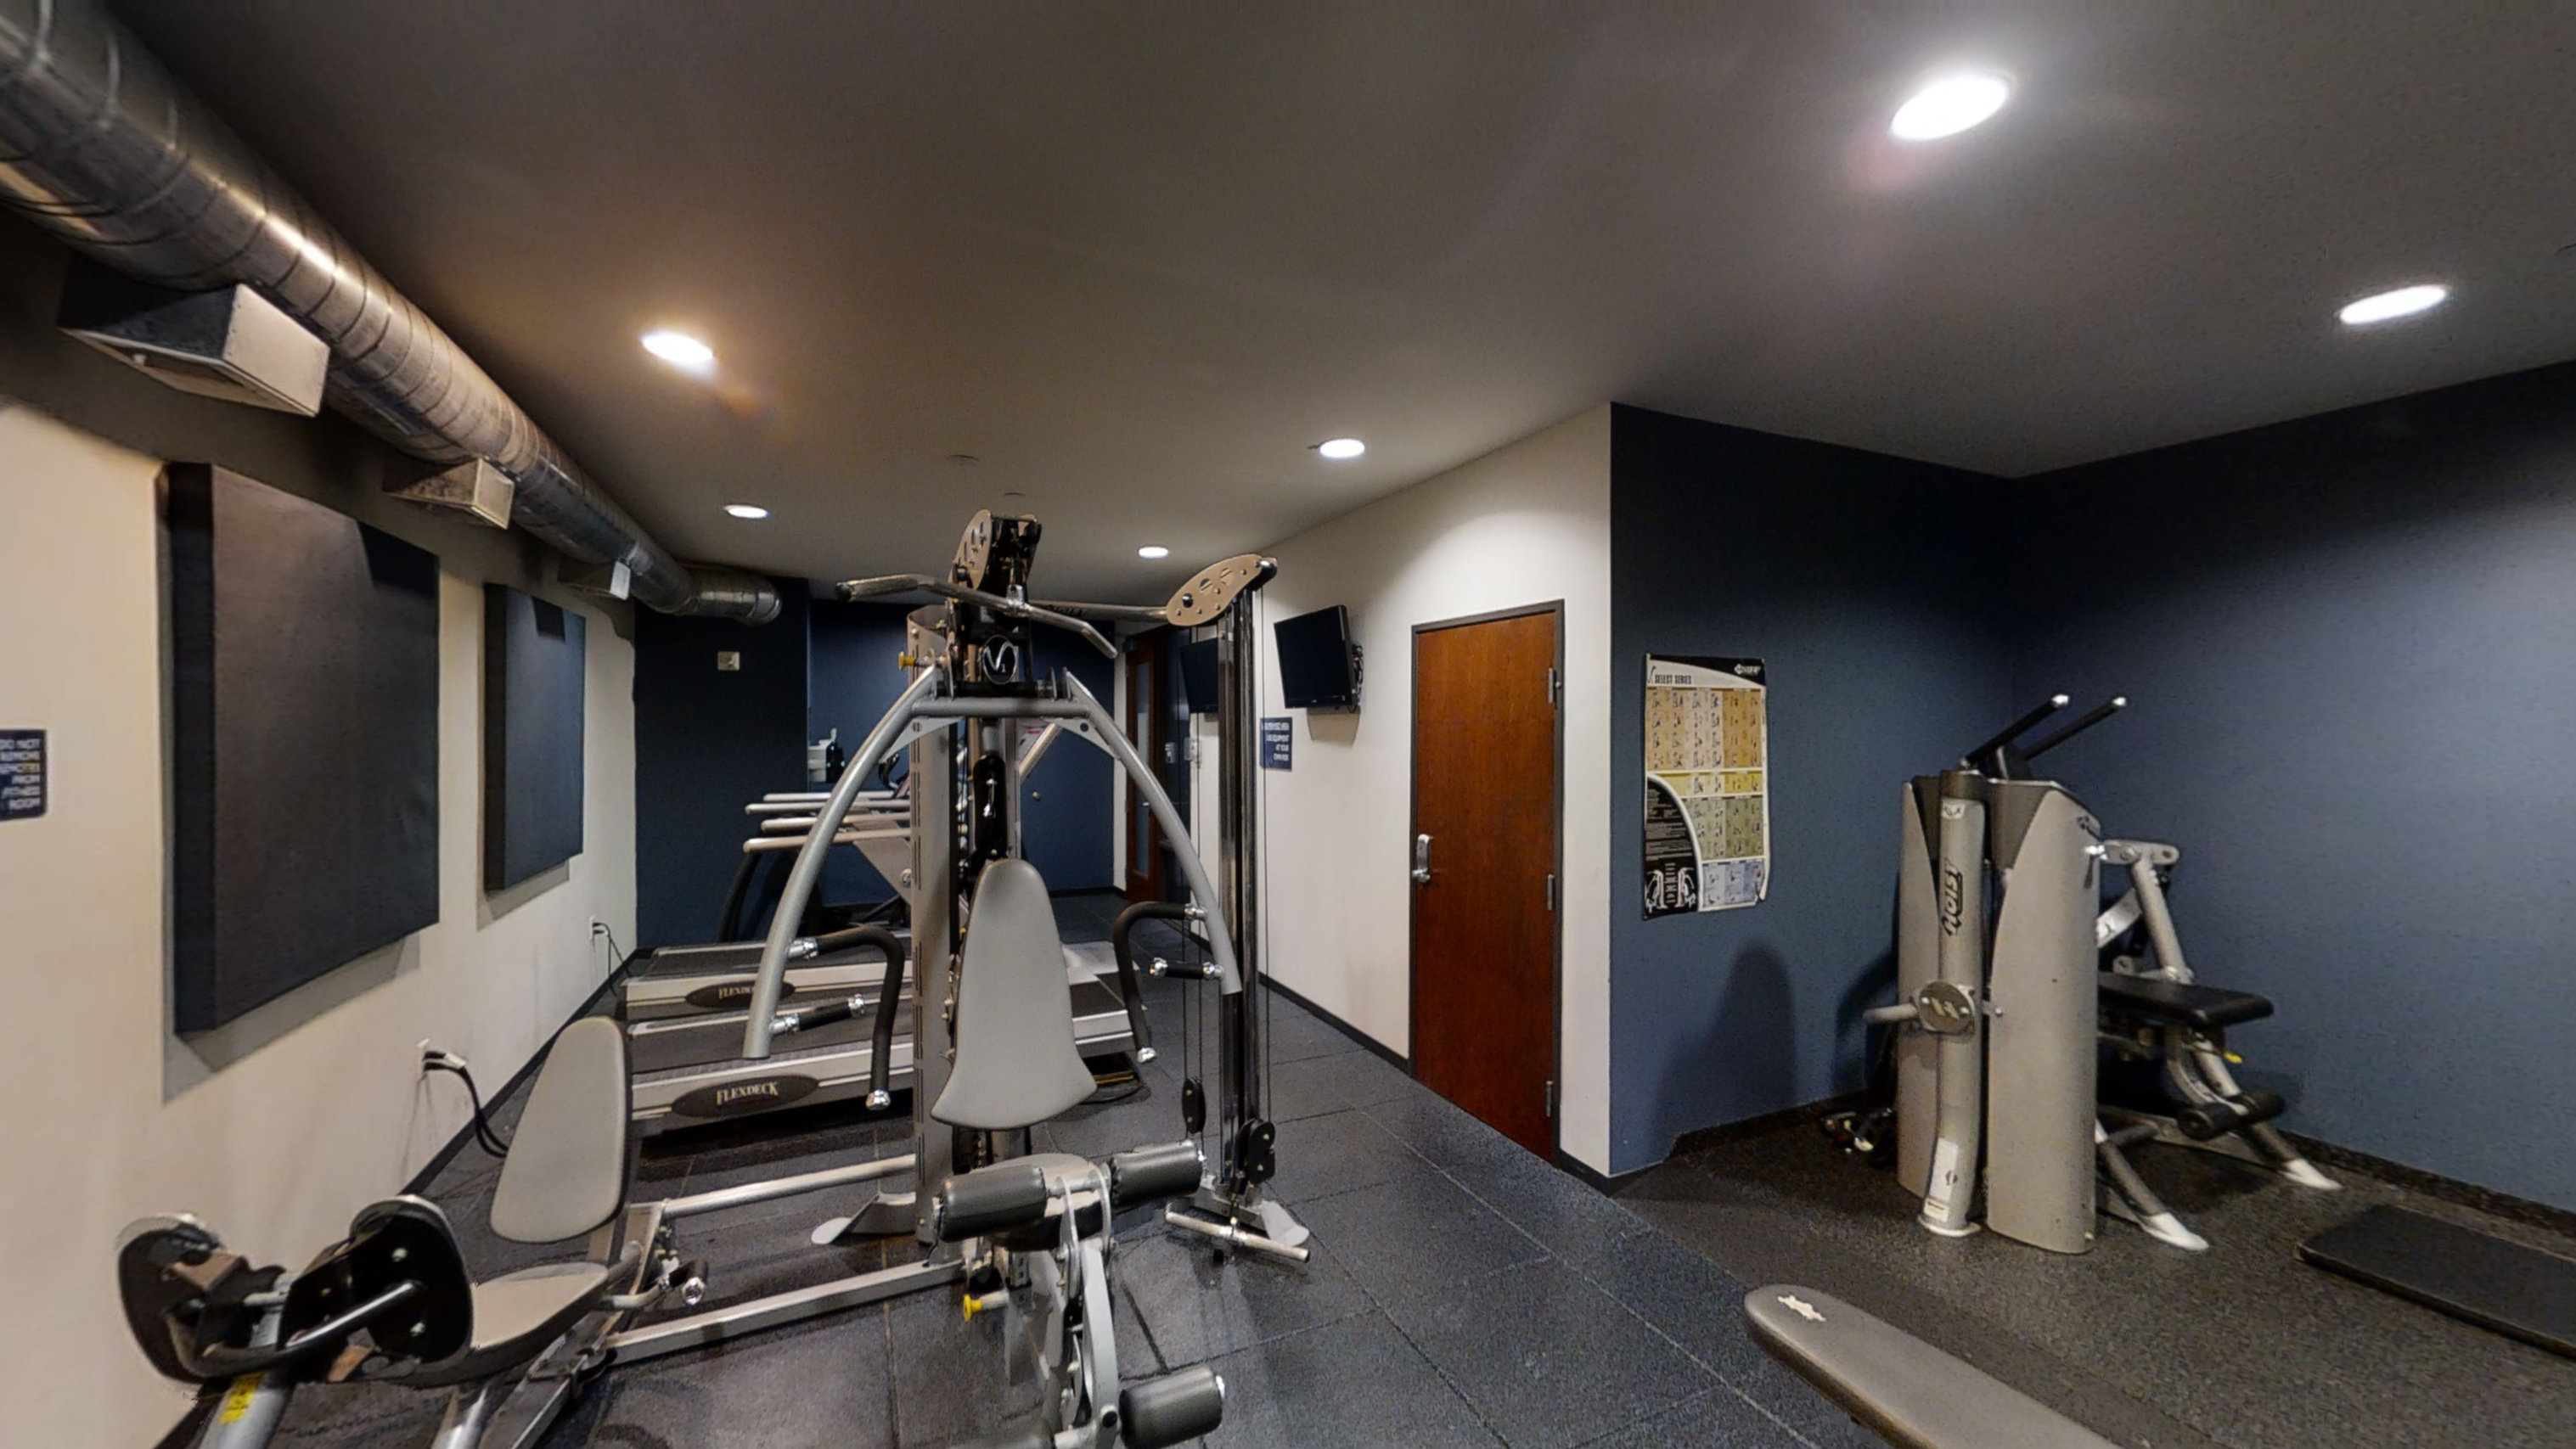 412 Lofts Apartments Lifestyle - 24 Hour Fitness Gym